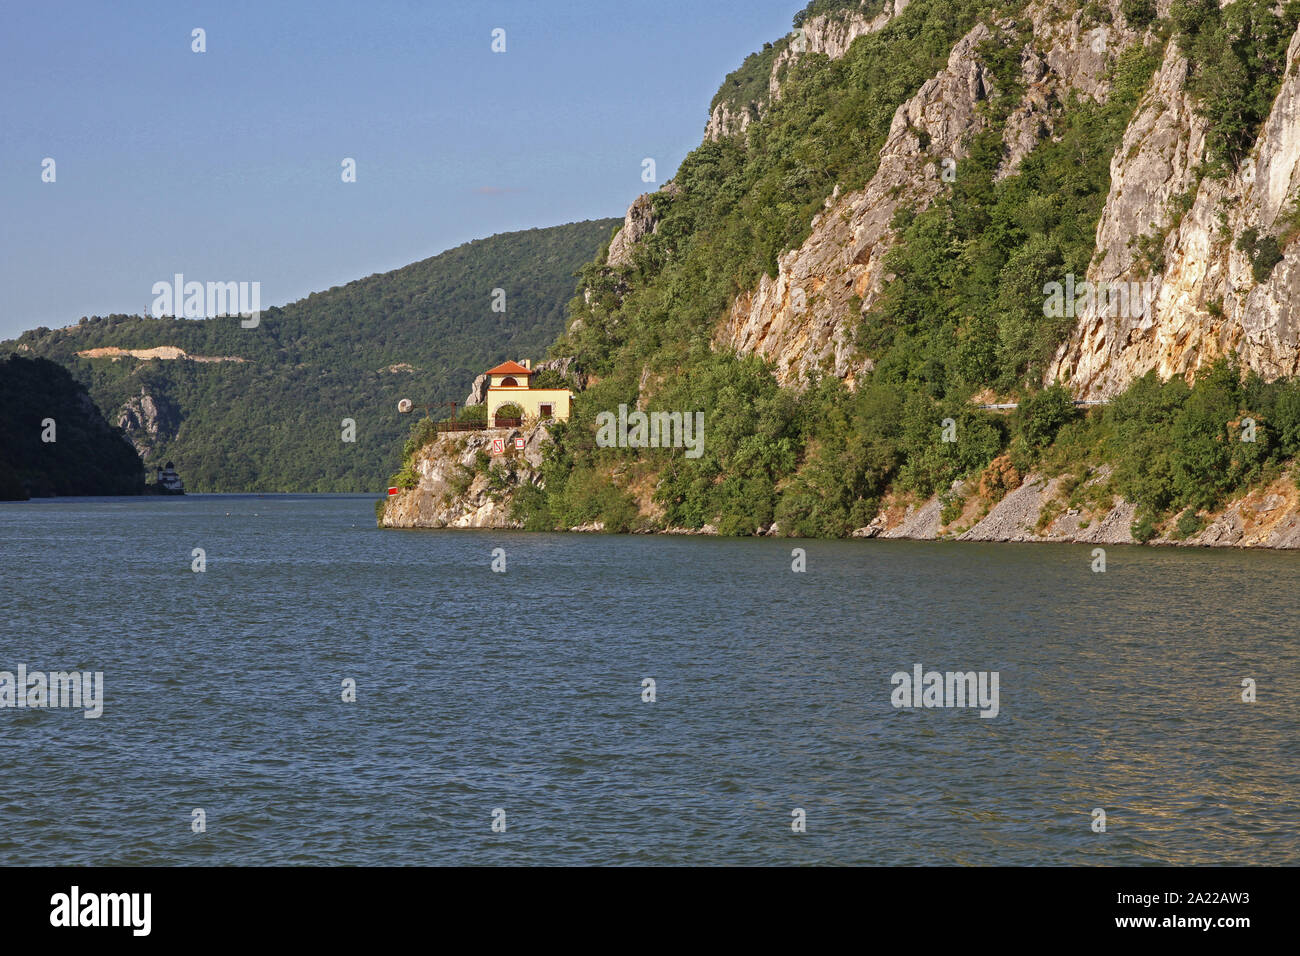 View of train station in Djerdap Gorge and entrance to The Iron Gate and The Great Cauldron on the Danube River, border between Romania and Serbia. Stock Photo